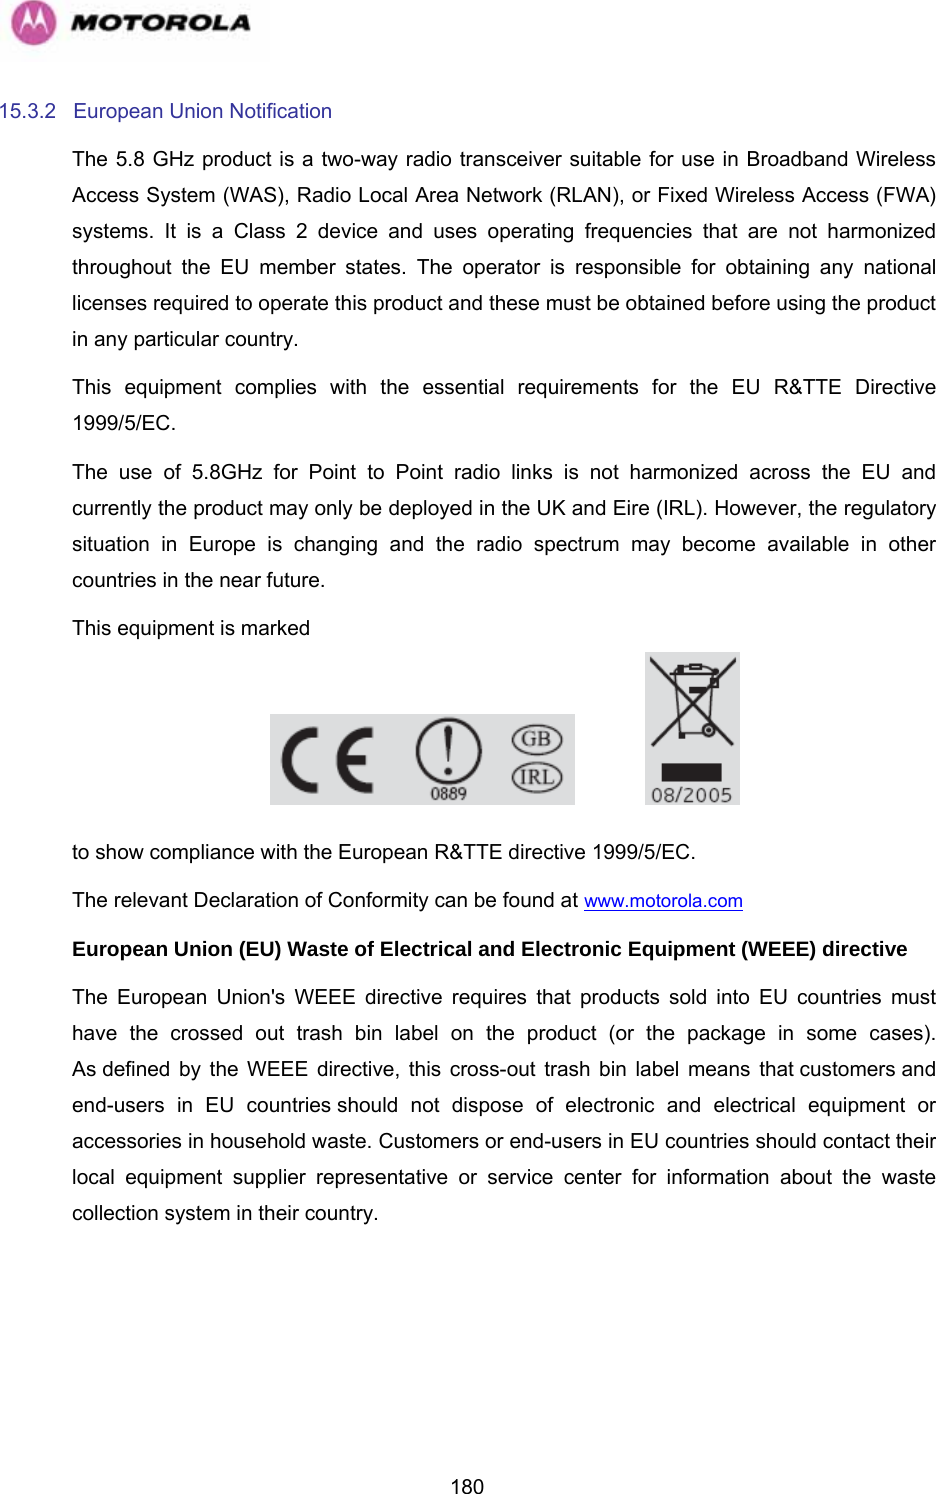   18015.3.2 European Union Notification The 5.8 GHz product is a two-way radio transceiver suitable for use in Broadband Wireless Access System (WAS), Radio Local Area Network (RLAN), or Fixed Wireless Access (FWA) systems. It is a Class 2 device and uses operating frequencies that are not harmonized throughout the EU member states. The operator is responsible for obtaining any national licenses required to operate this product and these must be obtained before using the product in any particular country. This equipment complies with the essential requirements for the EU R&amp;TTE Directive 1999/5/EC. The use of 5.8GHz for Point to Point radio links is not harmonized across the EU and currently the product may only be deployed in the UK and Eire (IRL). However, the regulatory situation in Europe is changing and the radio spectrum may become available in other countries in the near future.  This equipment is marked      to show compliance with the European R&amp;TTE directive 1999/5/EC. The relevant Declaration of Conformity can be found at www.motorola.com  European Union (EU) Waste of Electrical and Electronic Equipment (WEEE) directive  The European Union&apos;s WEEE directive requires that products sold into EU countries must have the crossed out trash bin label on the product (or the package in some cases). As defined by the WEEE directive, this cross-out trash bin label means that customers and end-users in EU countries should not dispose of electronic and electrical equipment or accessories in household waste. Customers or end-users in EU countries should contact their local equipment supplier representative or service center for information about the waste collection system in their country. 